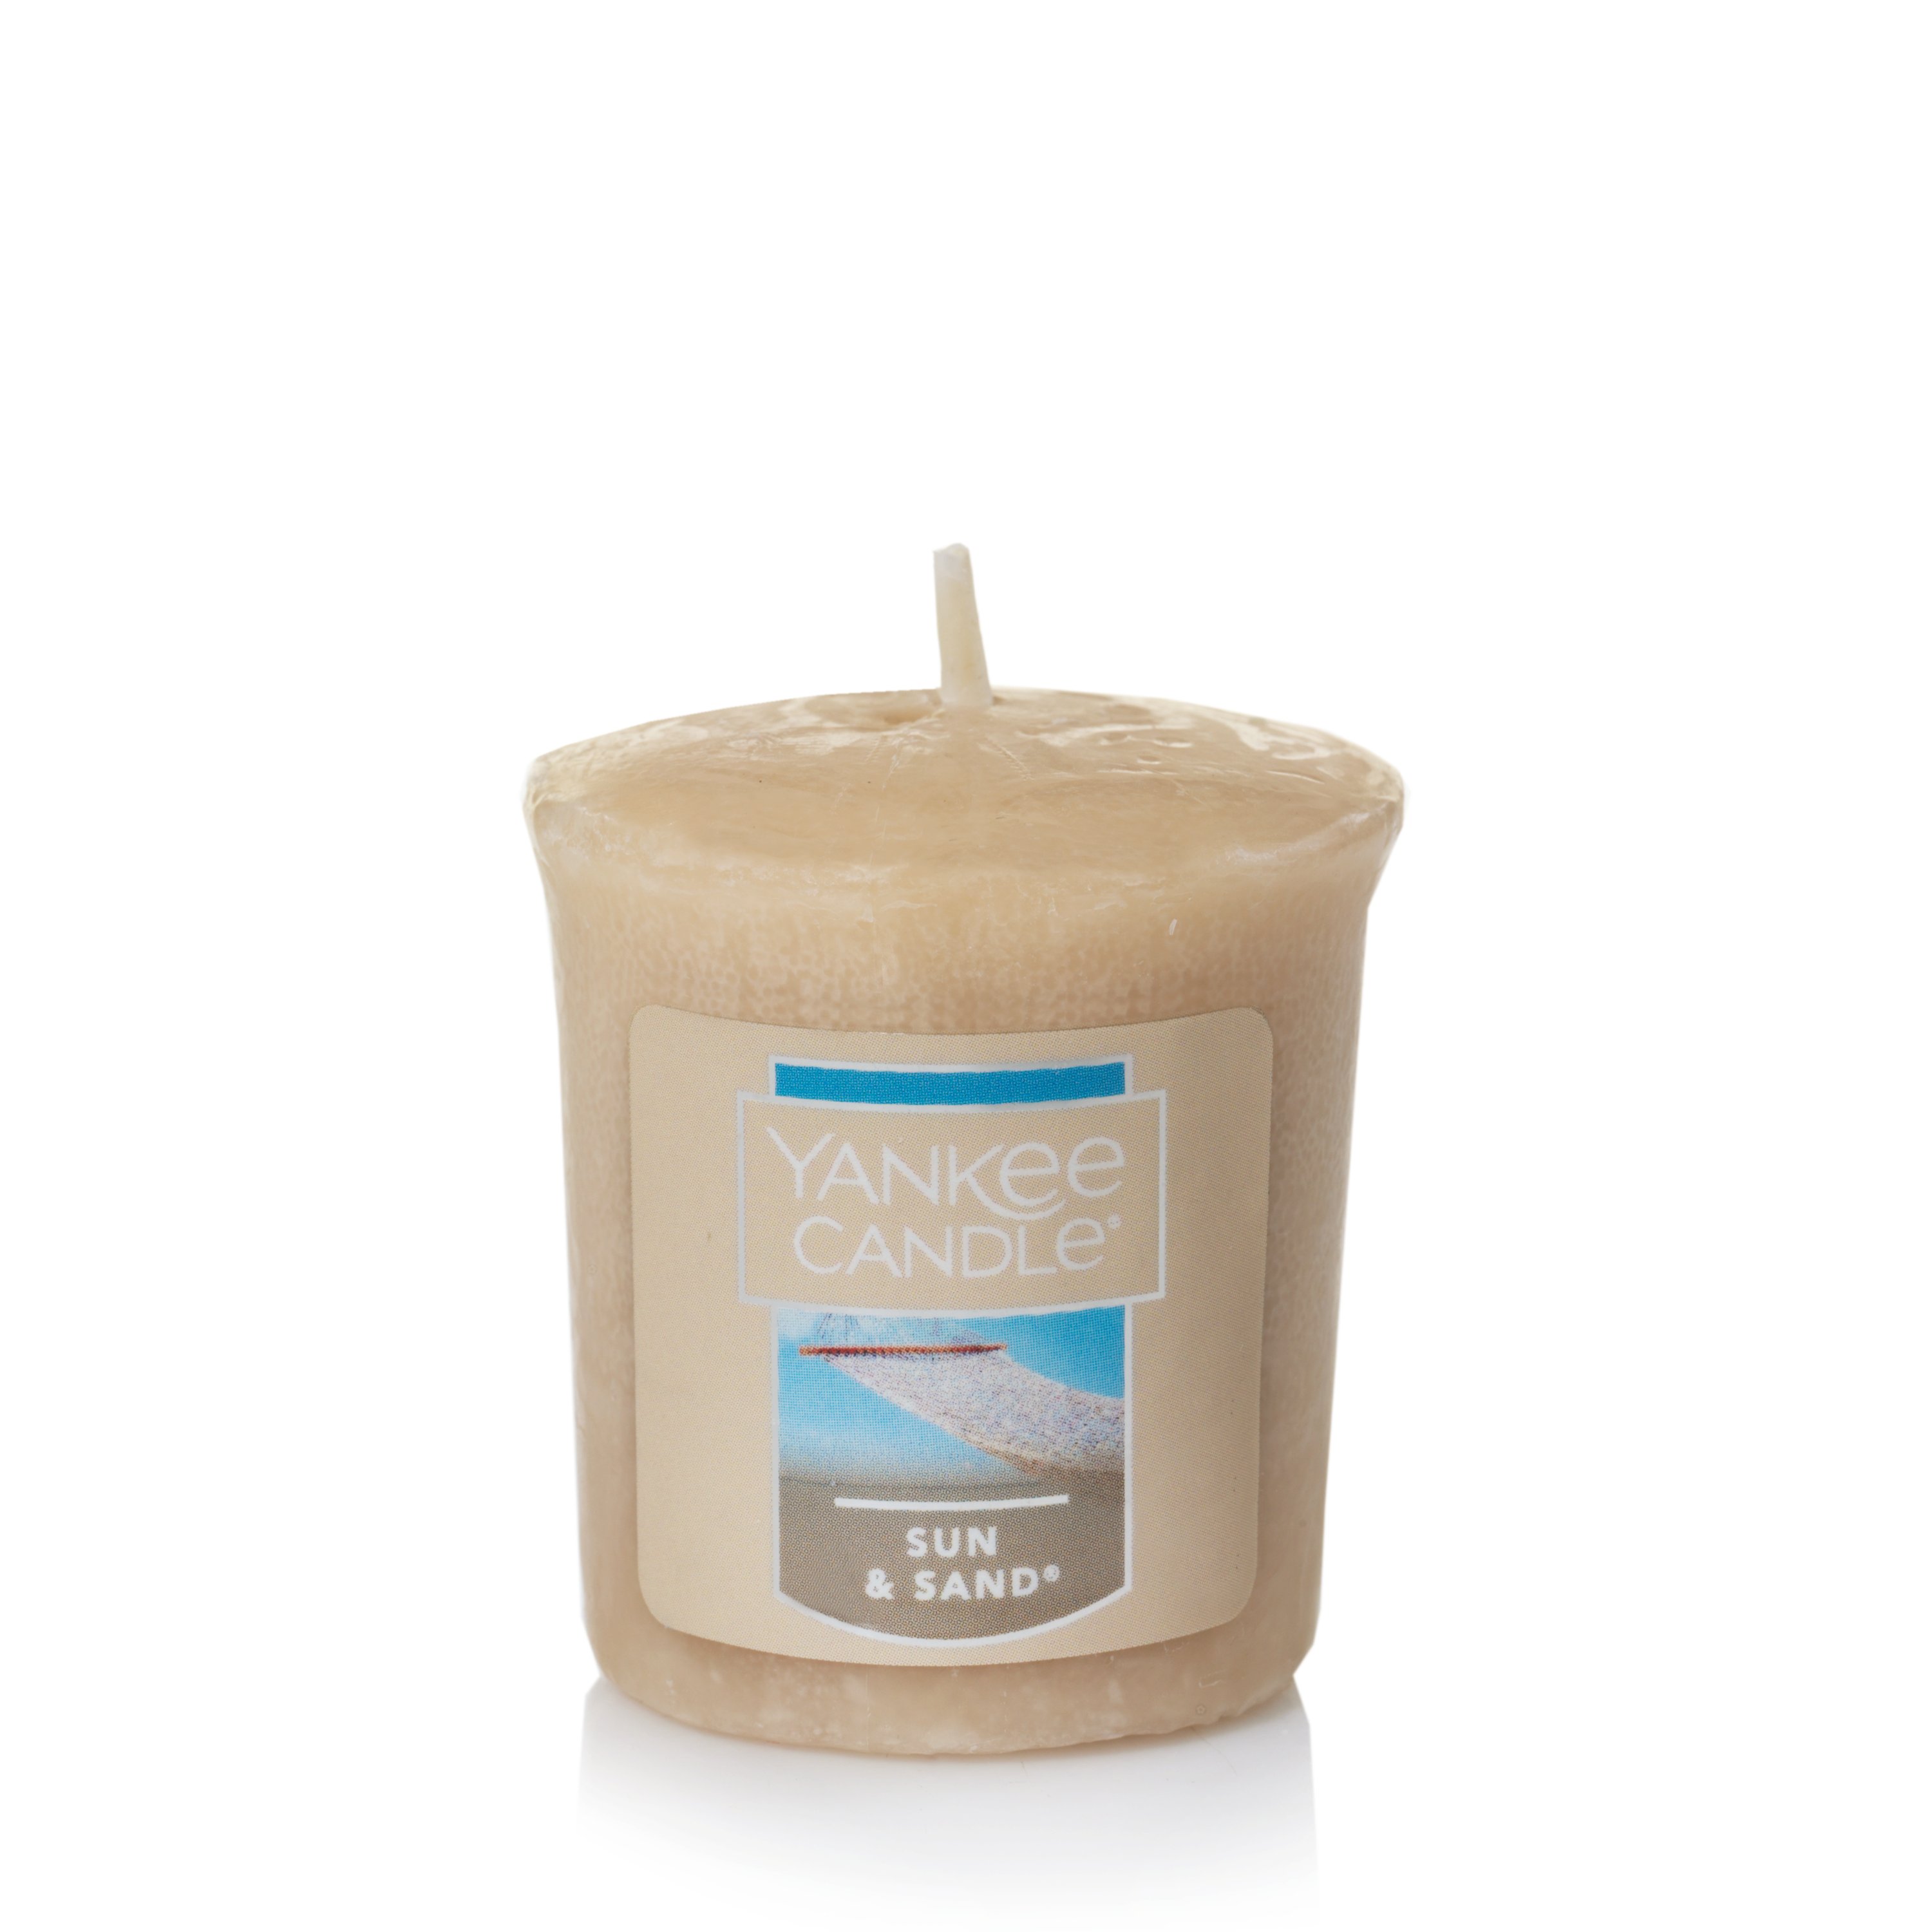 Yankee Candle Votive Scented Candles